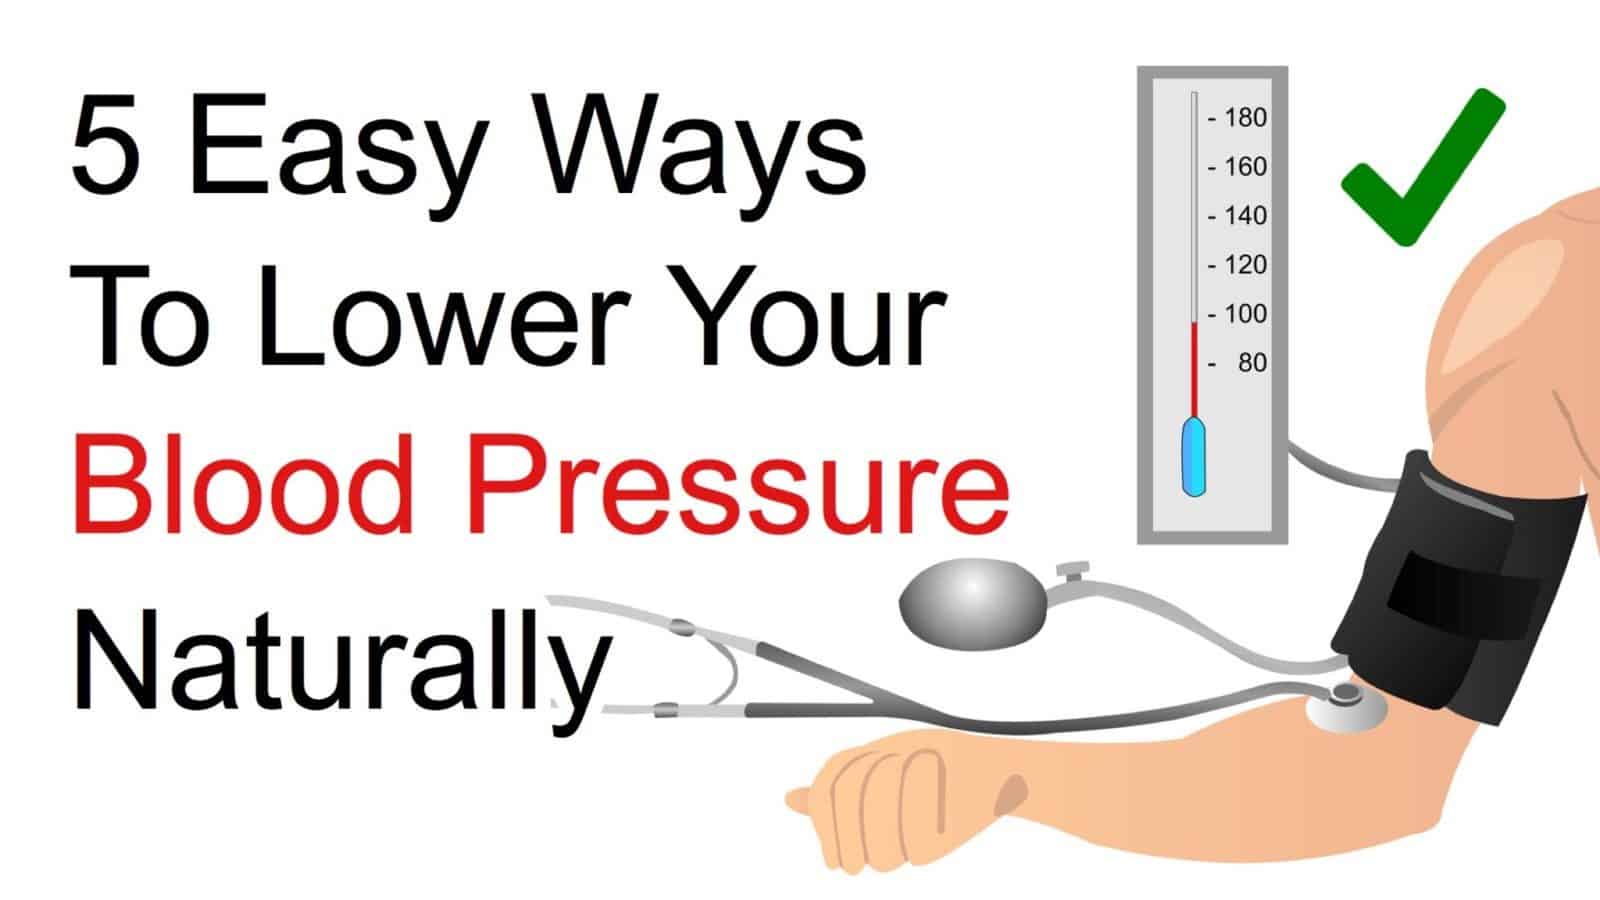 5 Easy Ways to Lower Your Blood Pressure Naturally